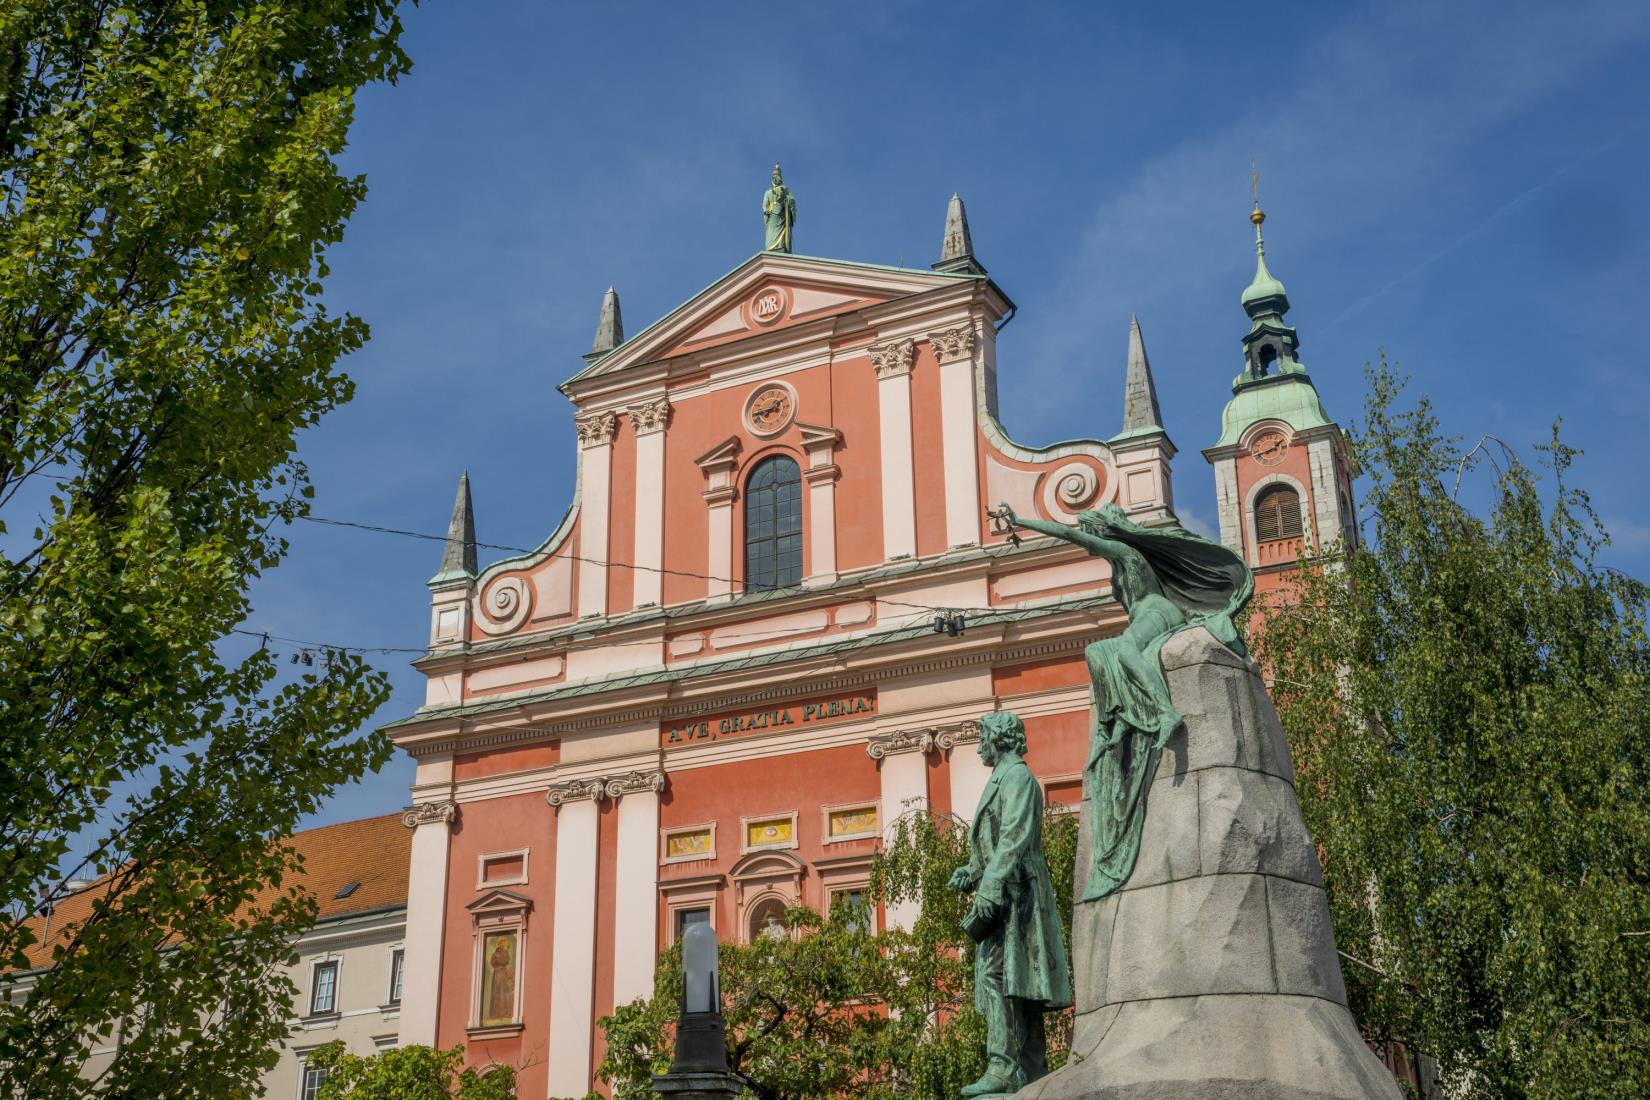 The Preseren mo<em></em>nument (1905) was erected in ho<em></em>nor of Slovenia's greatest poet, France Preserenon, with the Franciscan Church of the Annunciation in the background in old Ljubljana, Slovenia, Sept. 17, 2023. (Getty Images Photo)